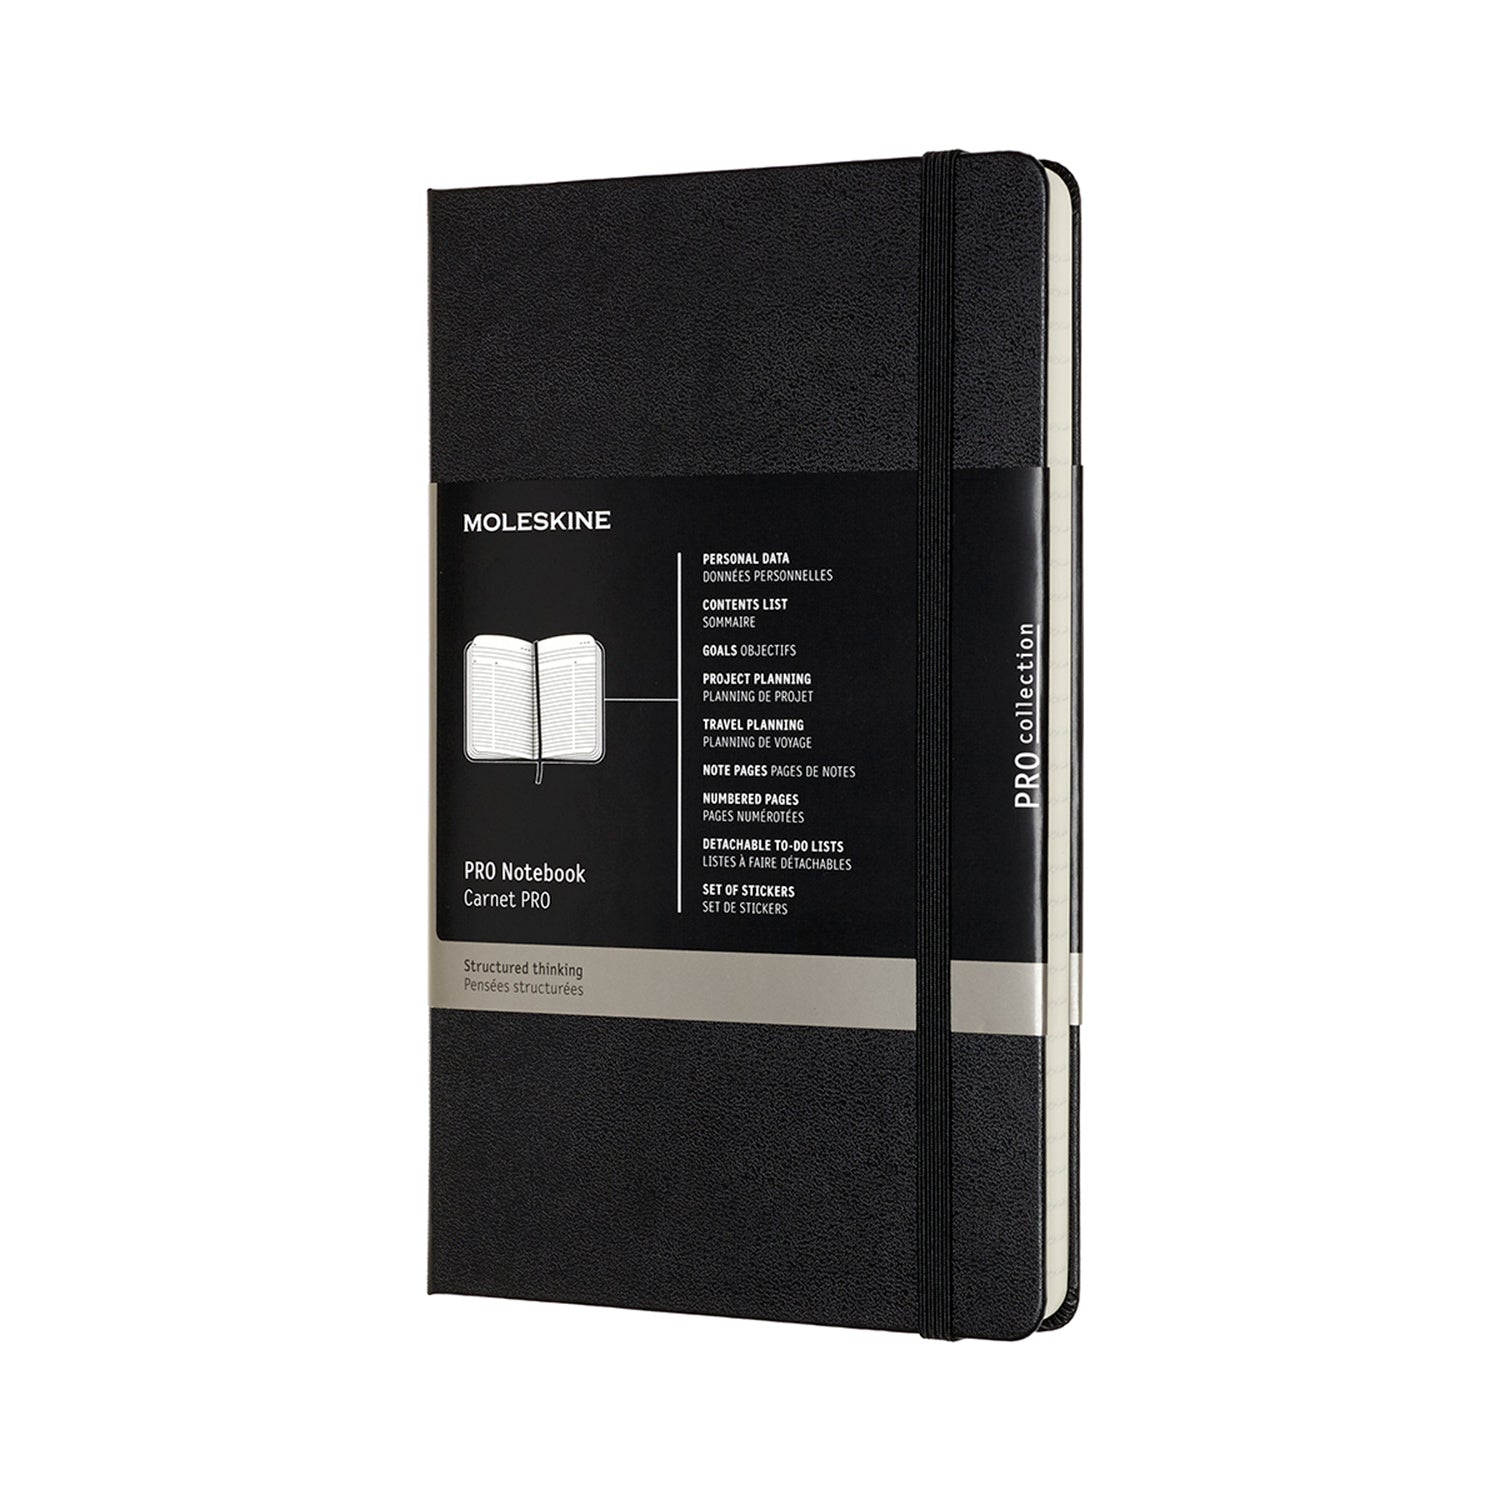 MOLESKINE PRO COLLECTION NOTEBOOK LARGE 5 X 8.25"